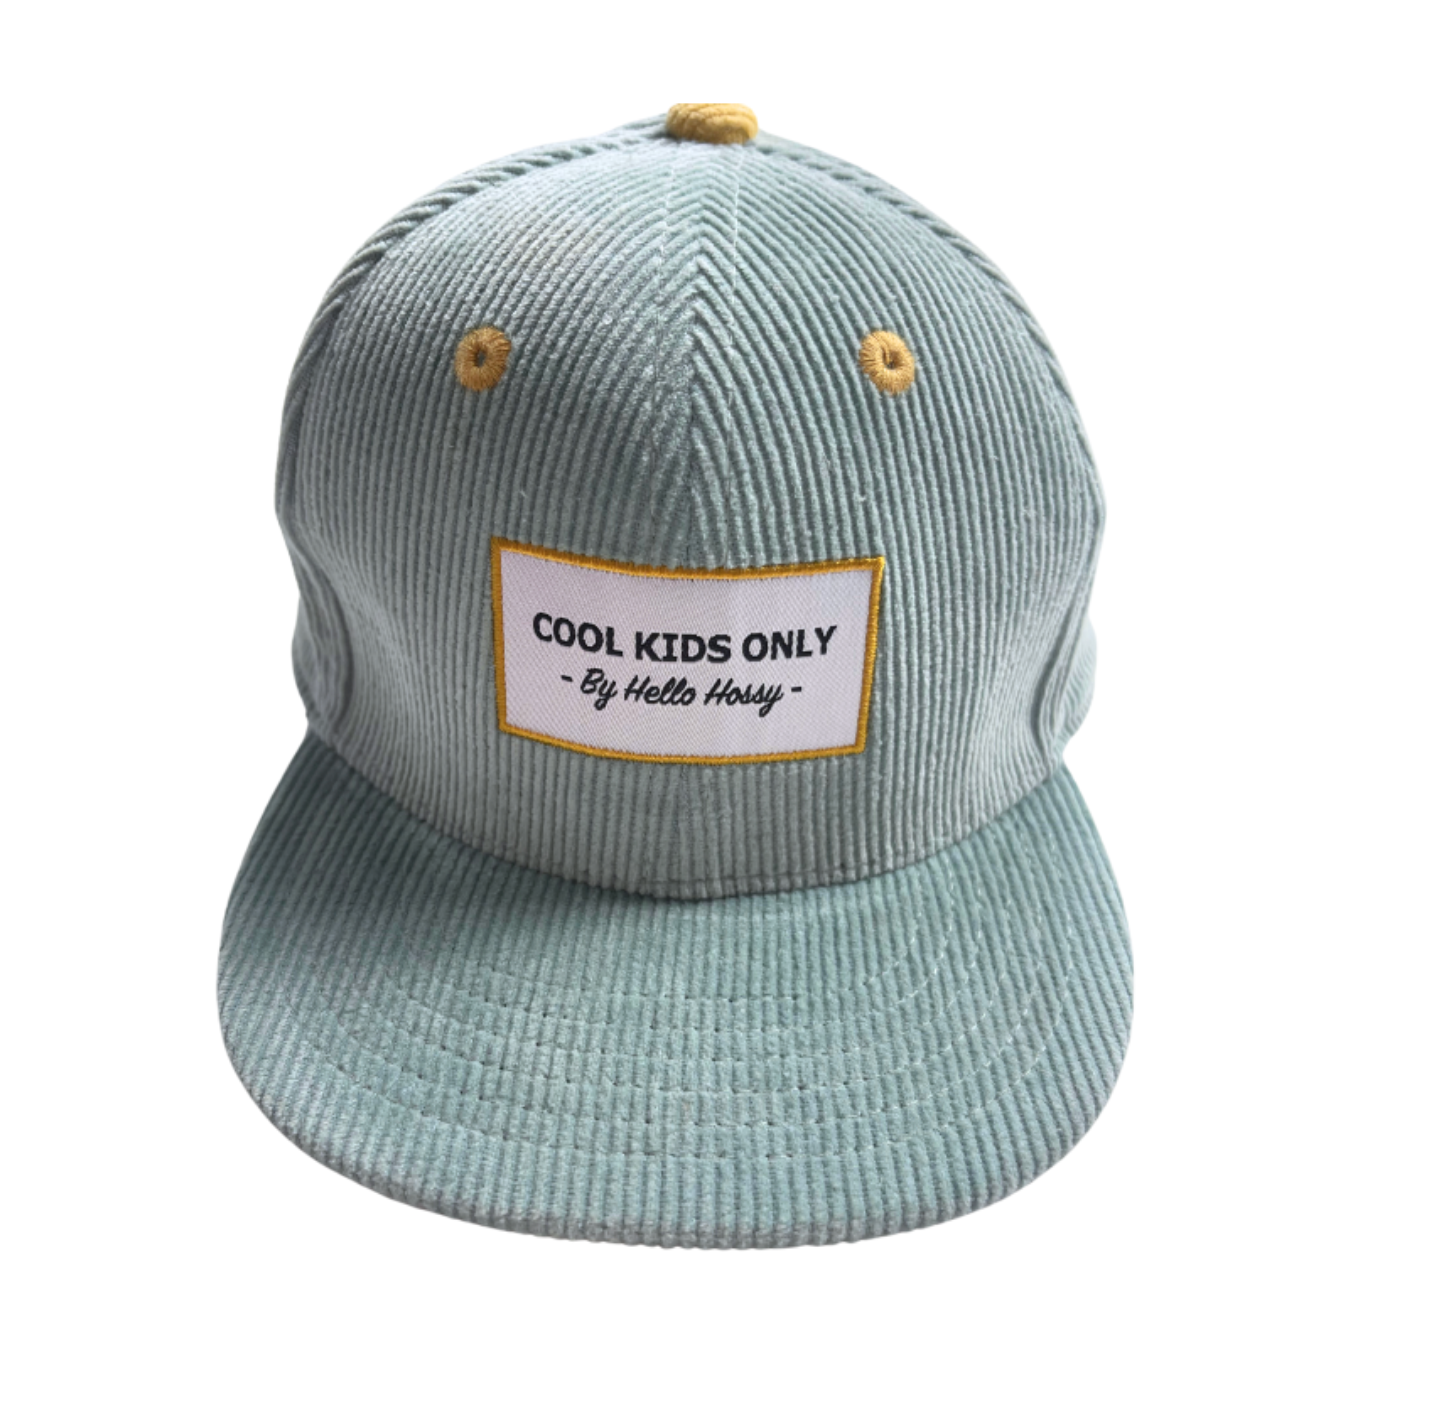 HELLO HOSSY - Casquette « Cool Kids Only » velours turquoise - 9/18 mois